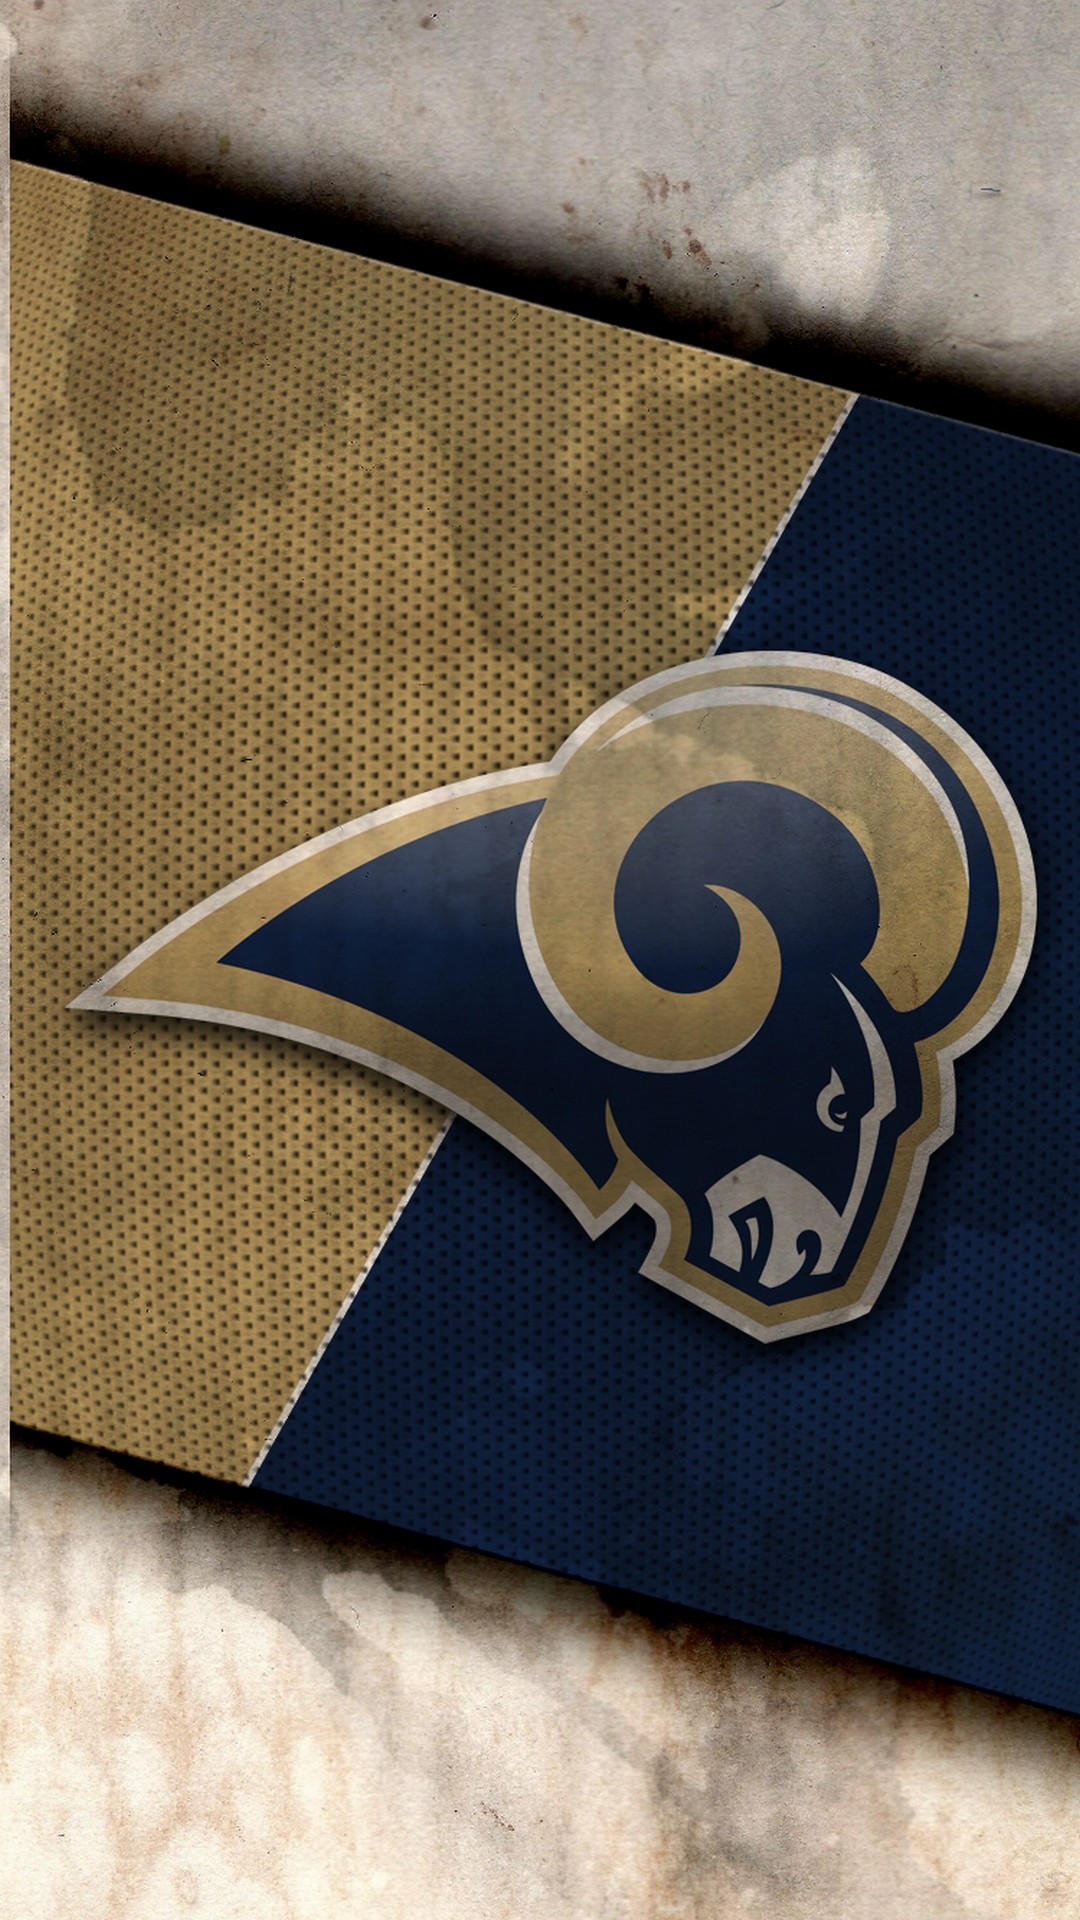 Los Angeles Rams iPhone Wallpaper HD with high-resolution 1080x1920 pixel. Download and set as wallpaper for Desktop Computer, Apple iPhone X, XS Max, XR, 8, 7, 6, SE, iPad, Android